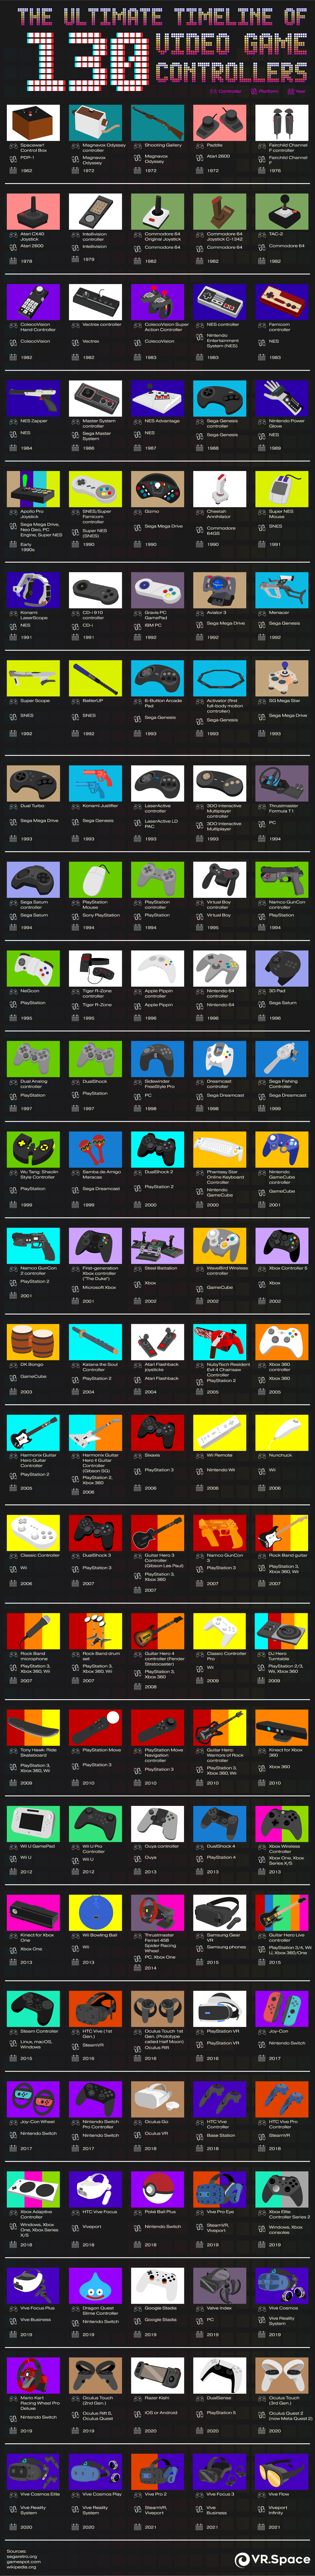 The Ultimate Timeline of 130 Video Game Controllers #Infographic